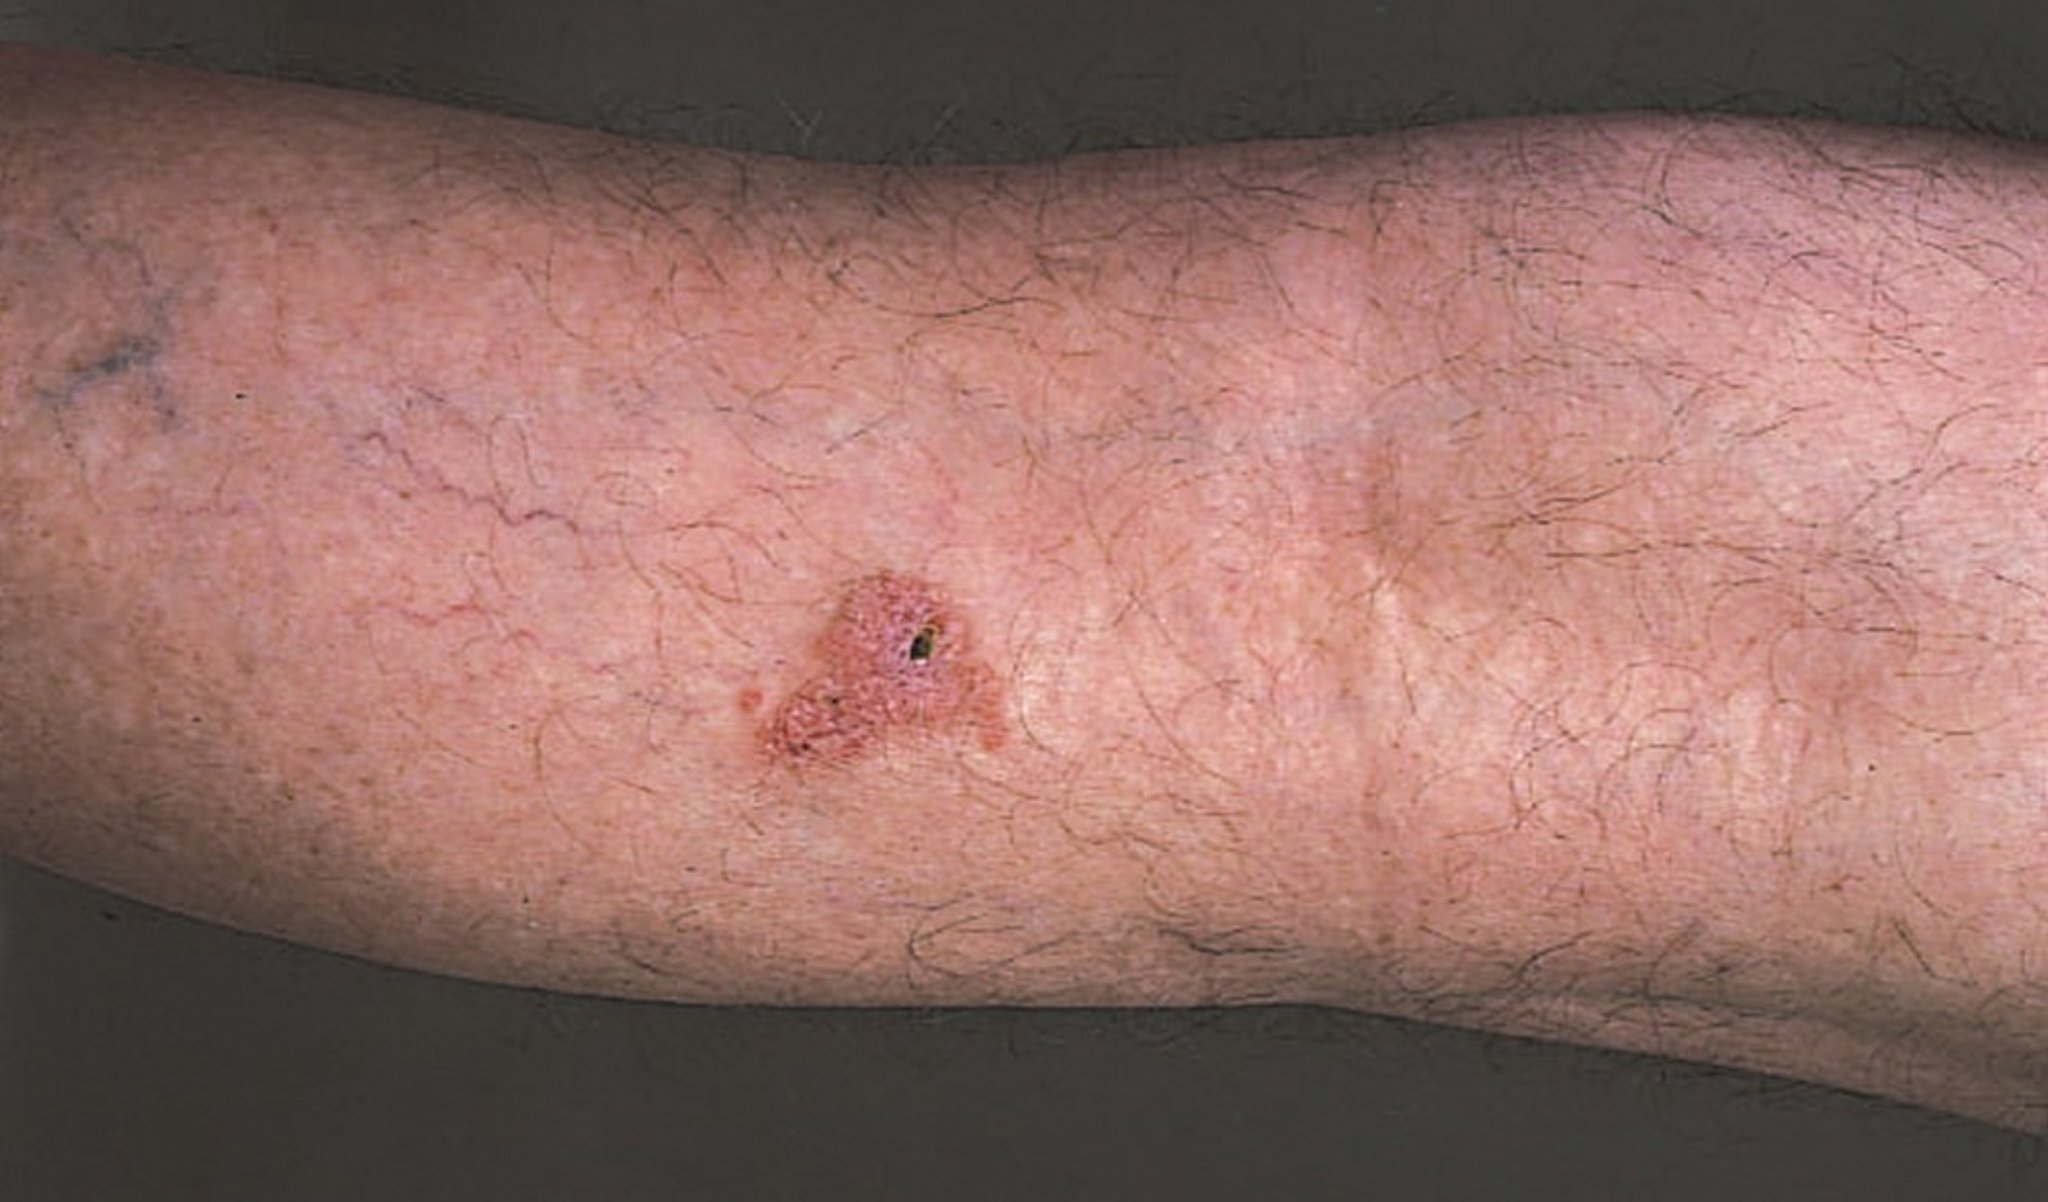 Squamous Cell Carcinoma (Arm)